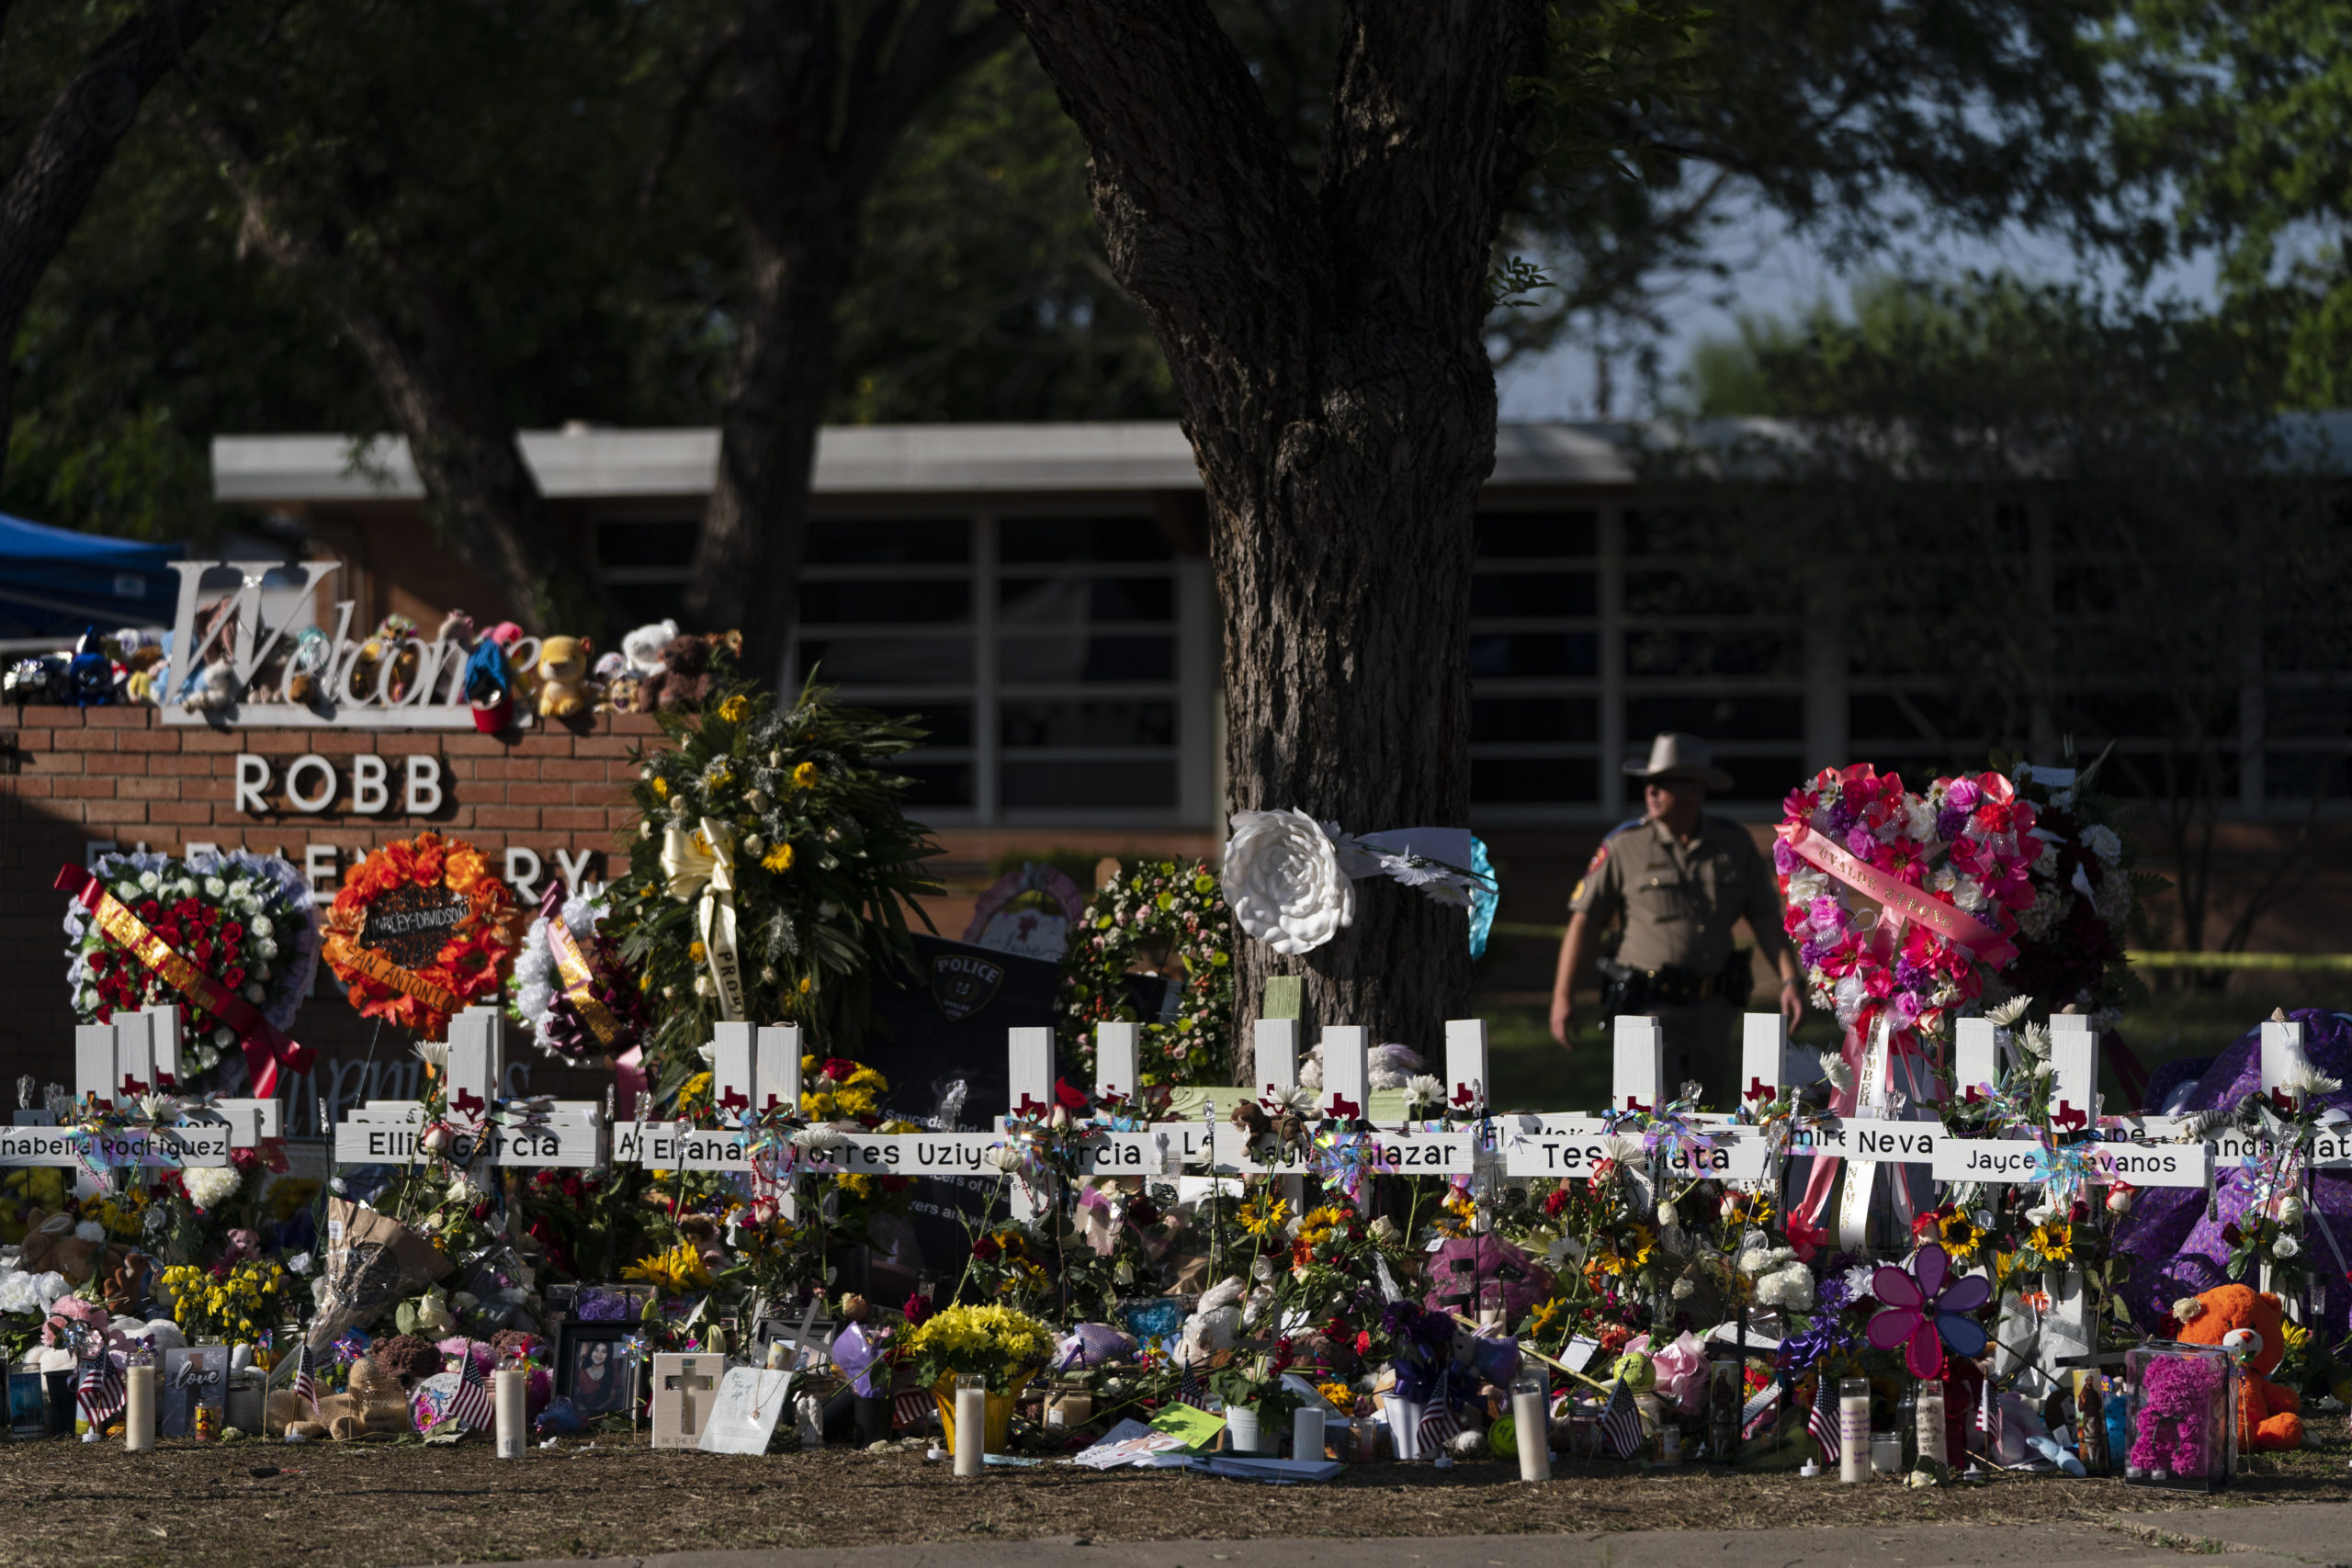 Flowers and candles are placed around crosses on May 28 at a memorial outside of Robb Elementary School in Uvalde, Texas.